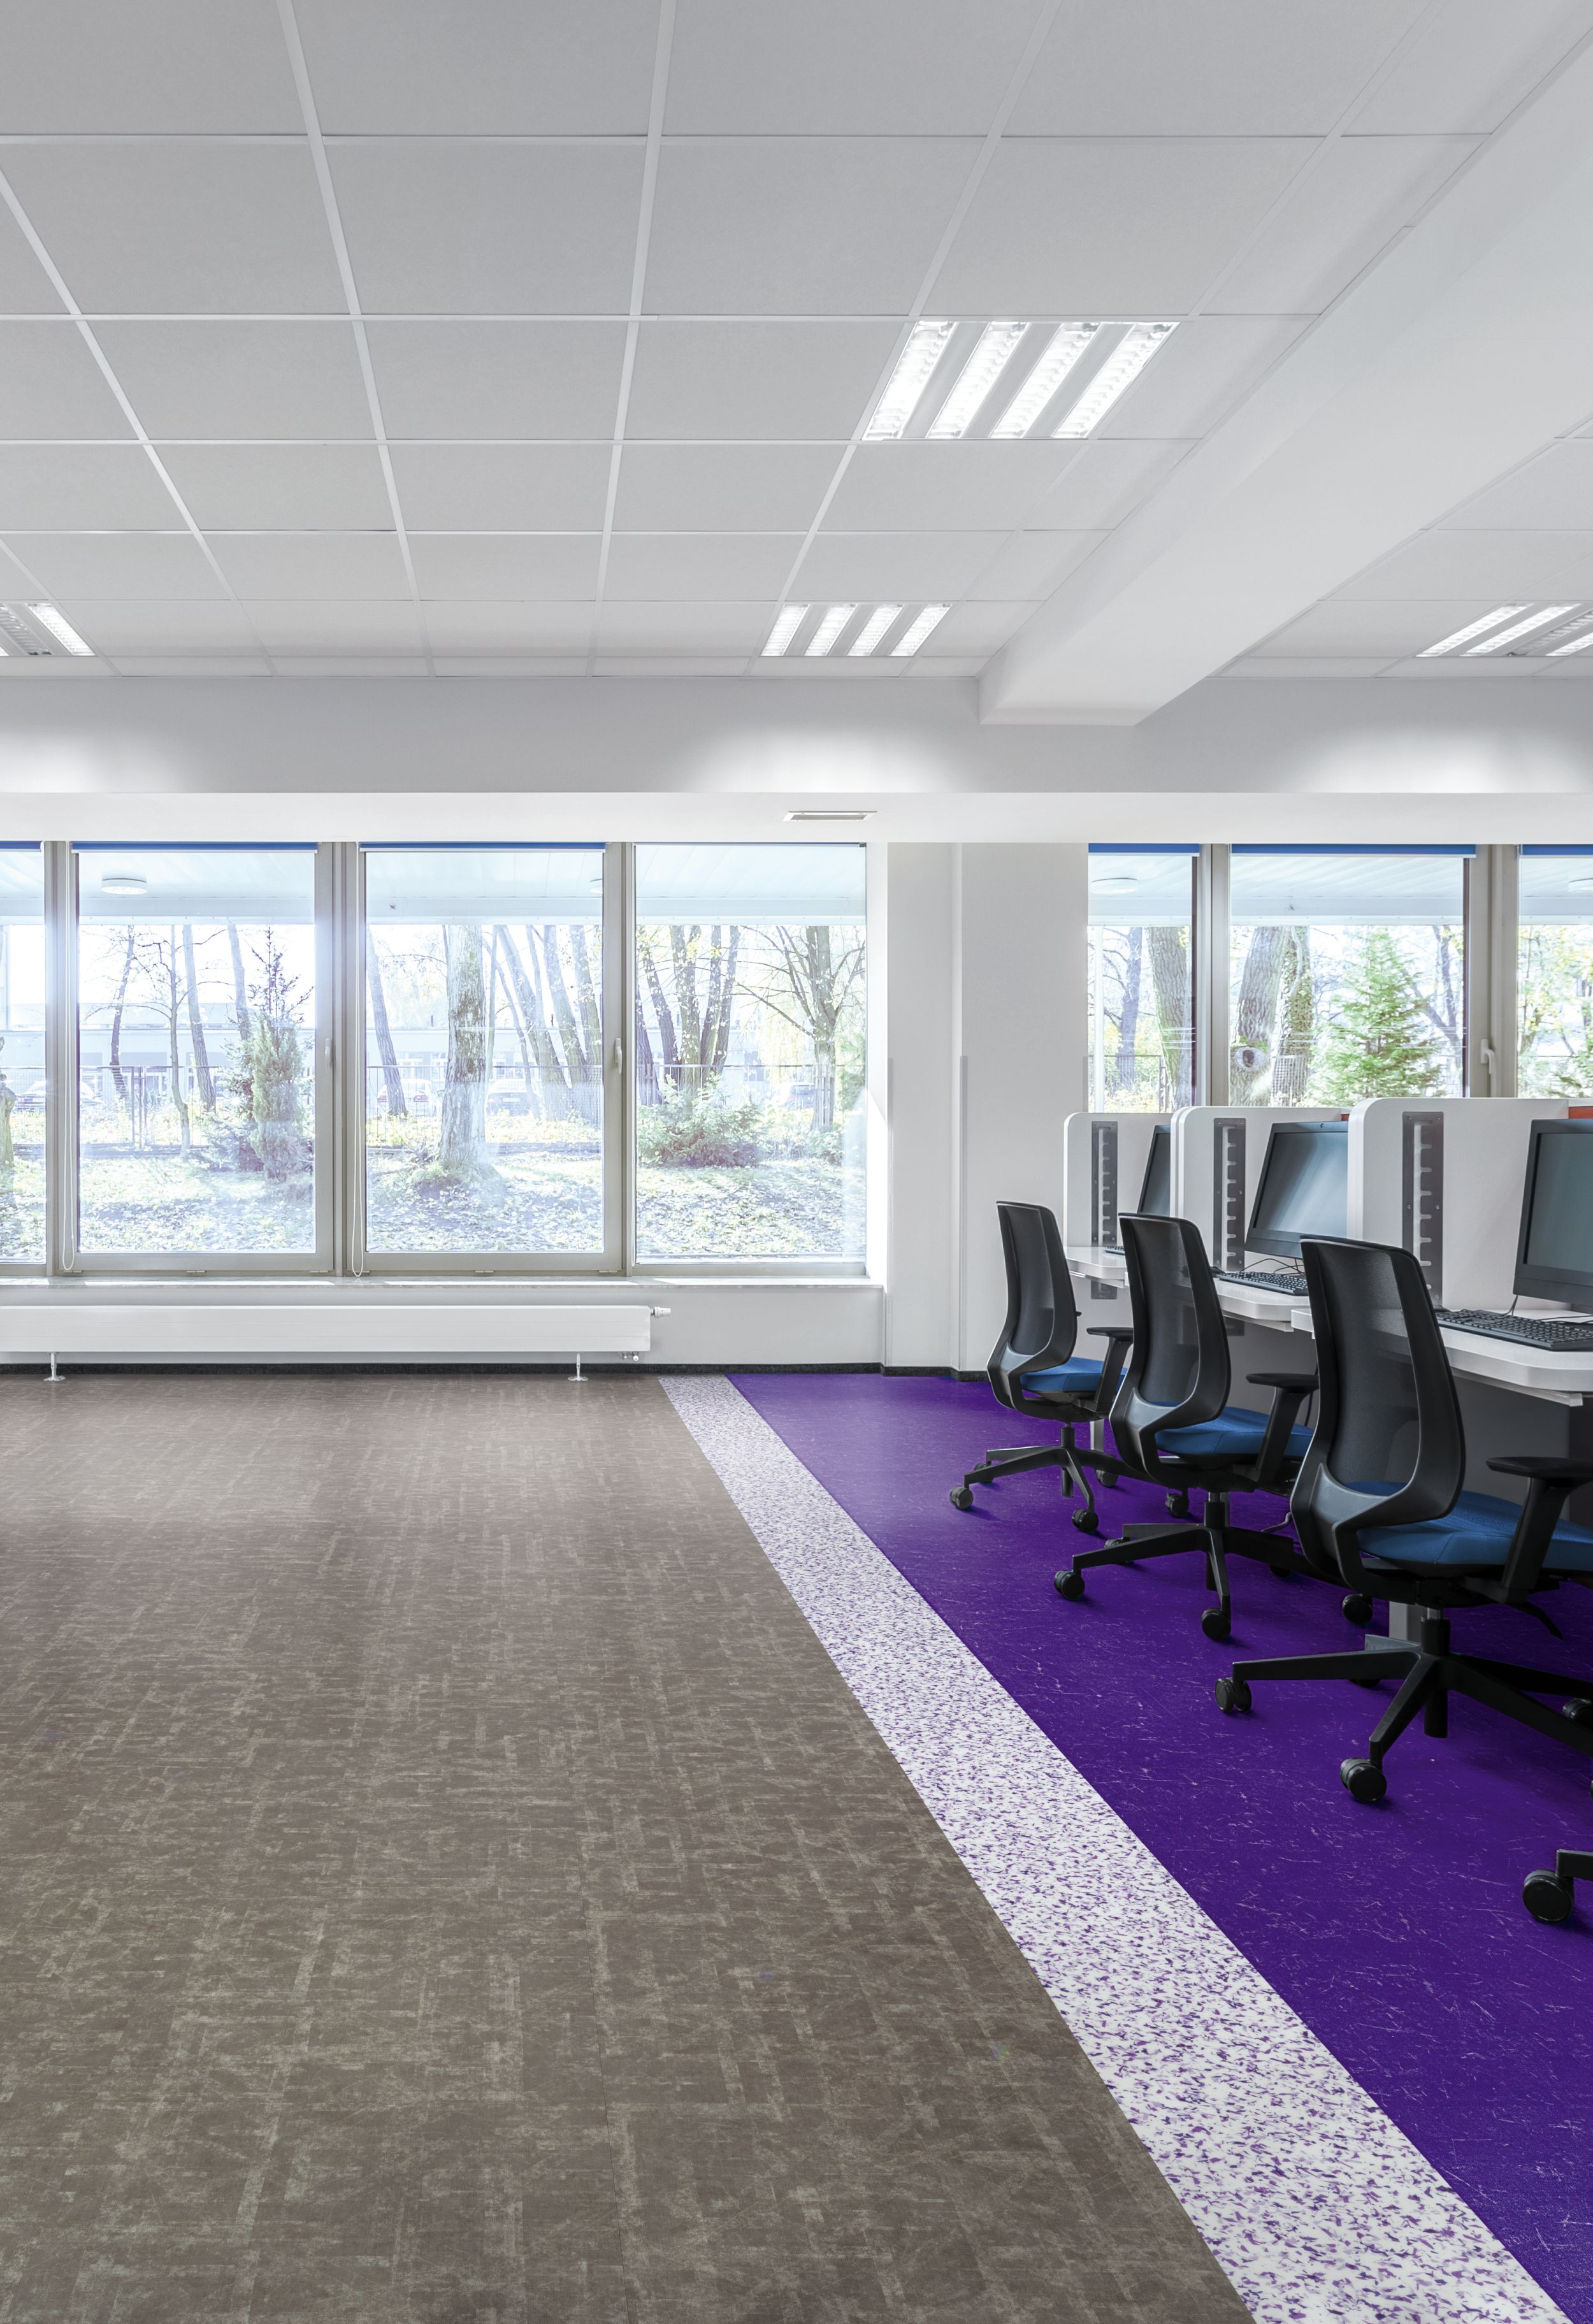 Interface Scorpio, Aries and Walk on By LVT in office setting with cubicles and chairs imagen número 10